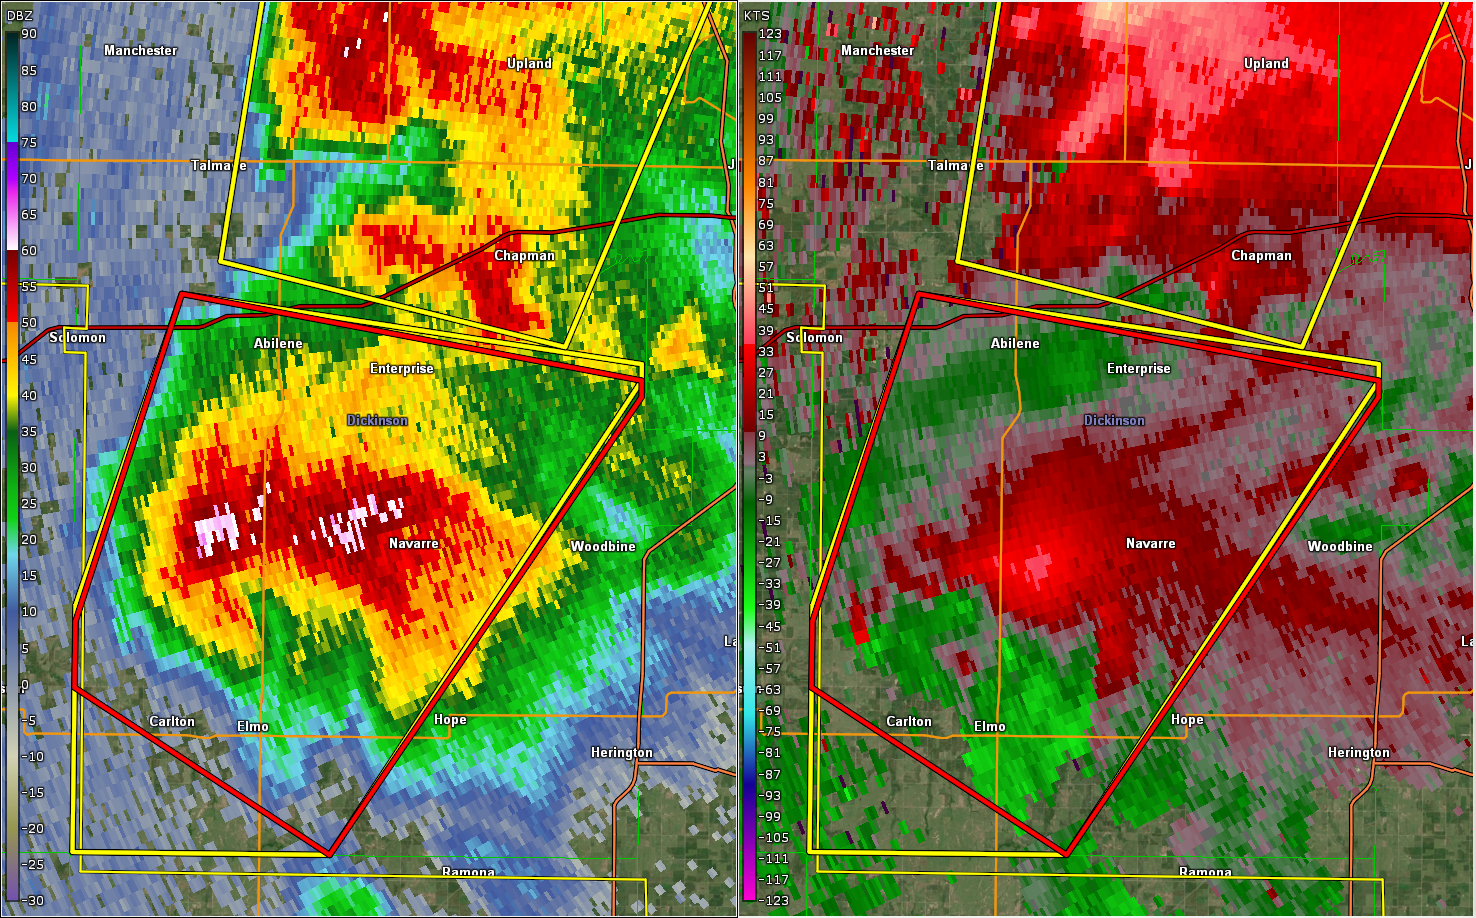 Radar at 6:32pm, at the time of the first tornado northeast of Carlton.